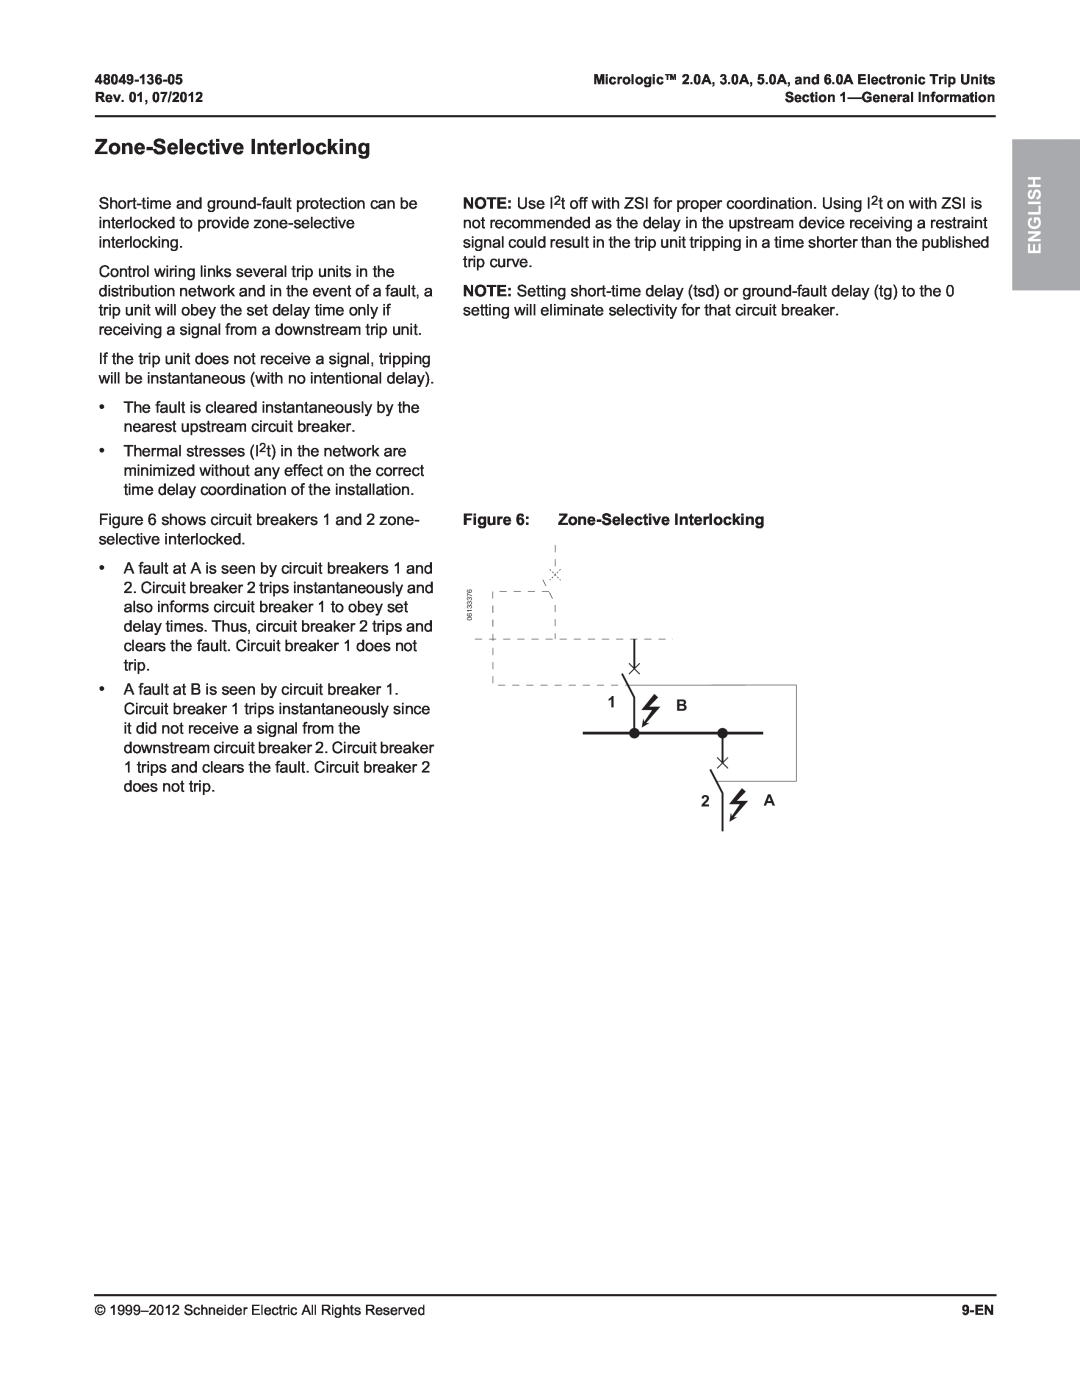 Schneider Electric 5.0A, 3.0A, 2.0A, and 6.0A manual Zone-Selective Interlocking, 1 B 2 A, English 